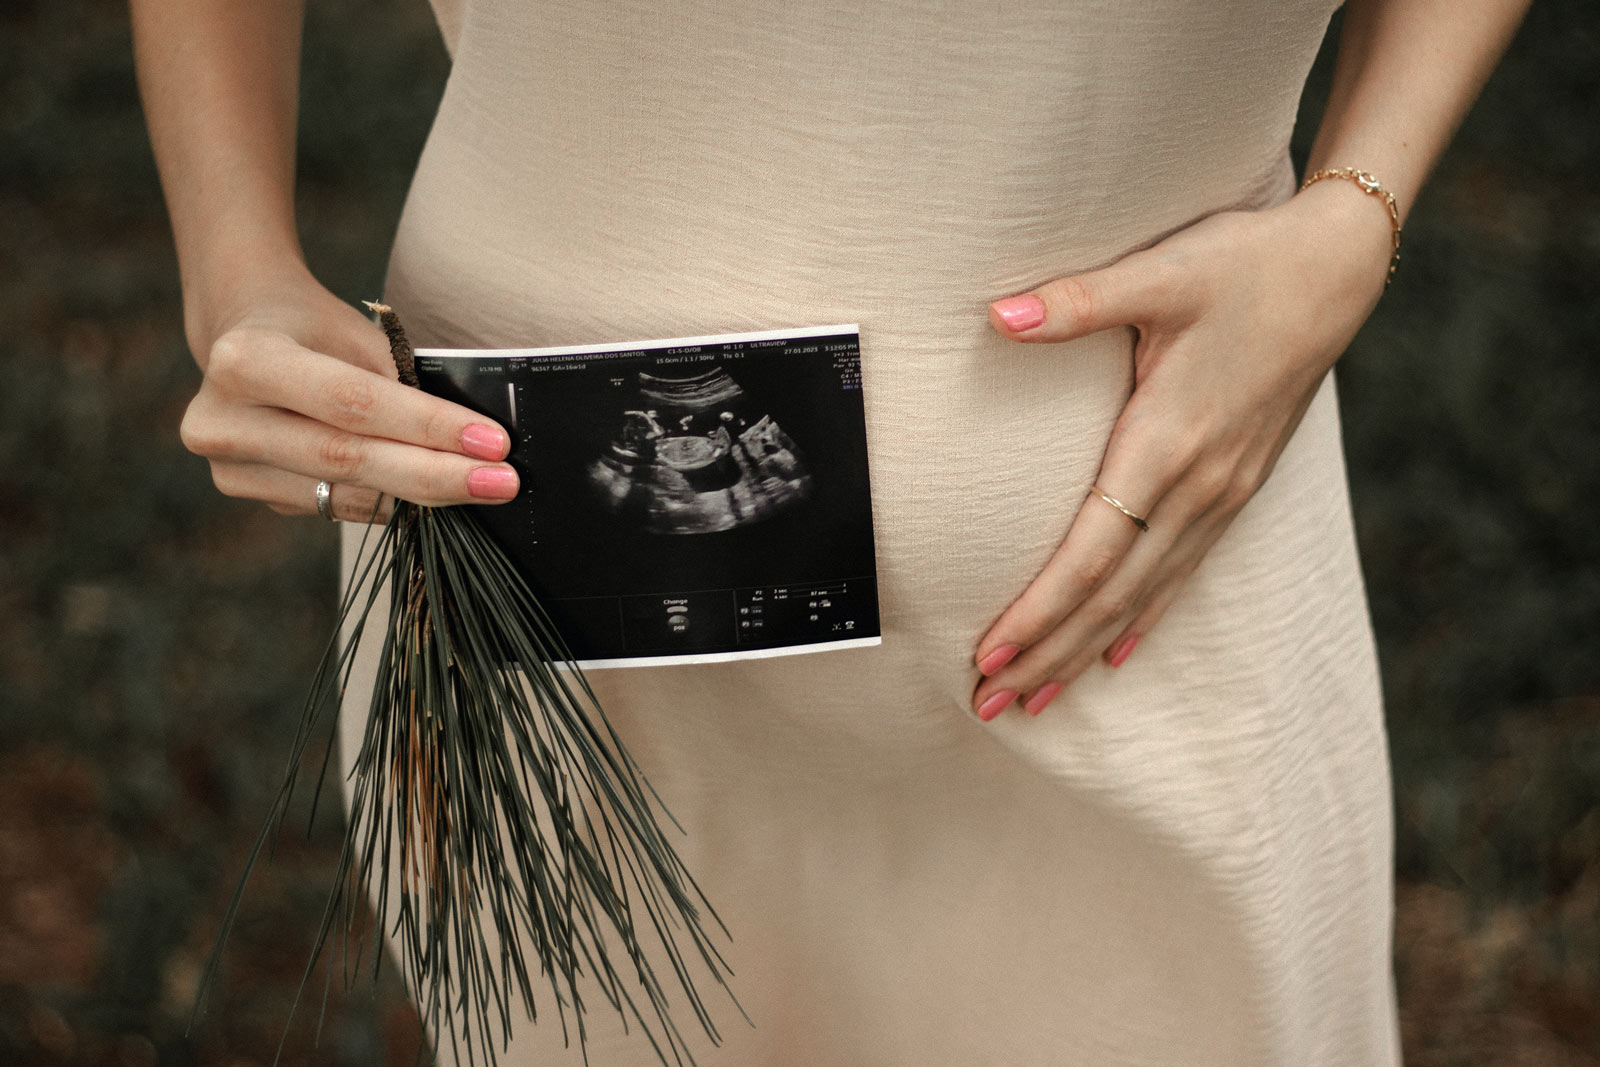 Featured image for “Pregnancy Care and Surrogacy”